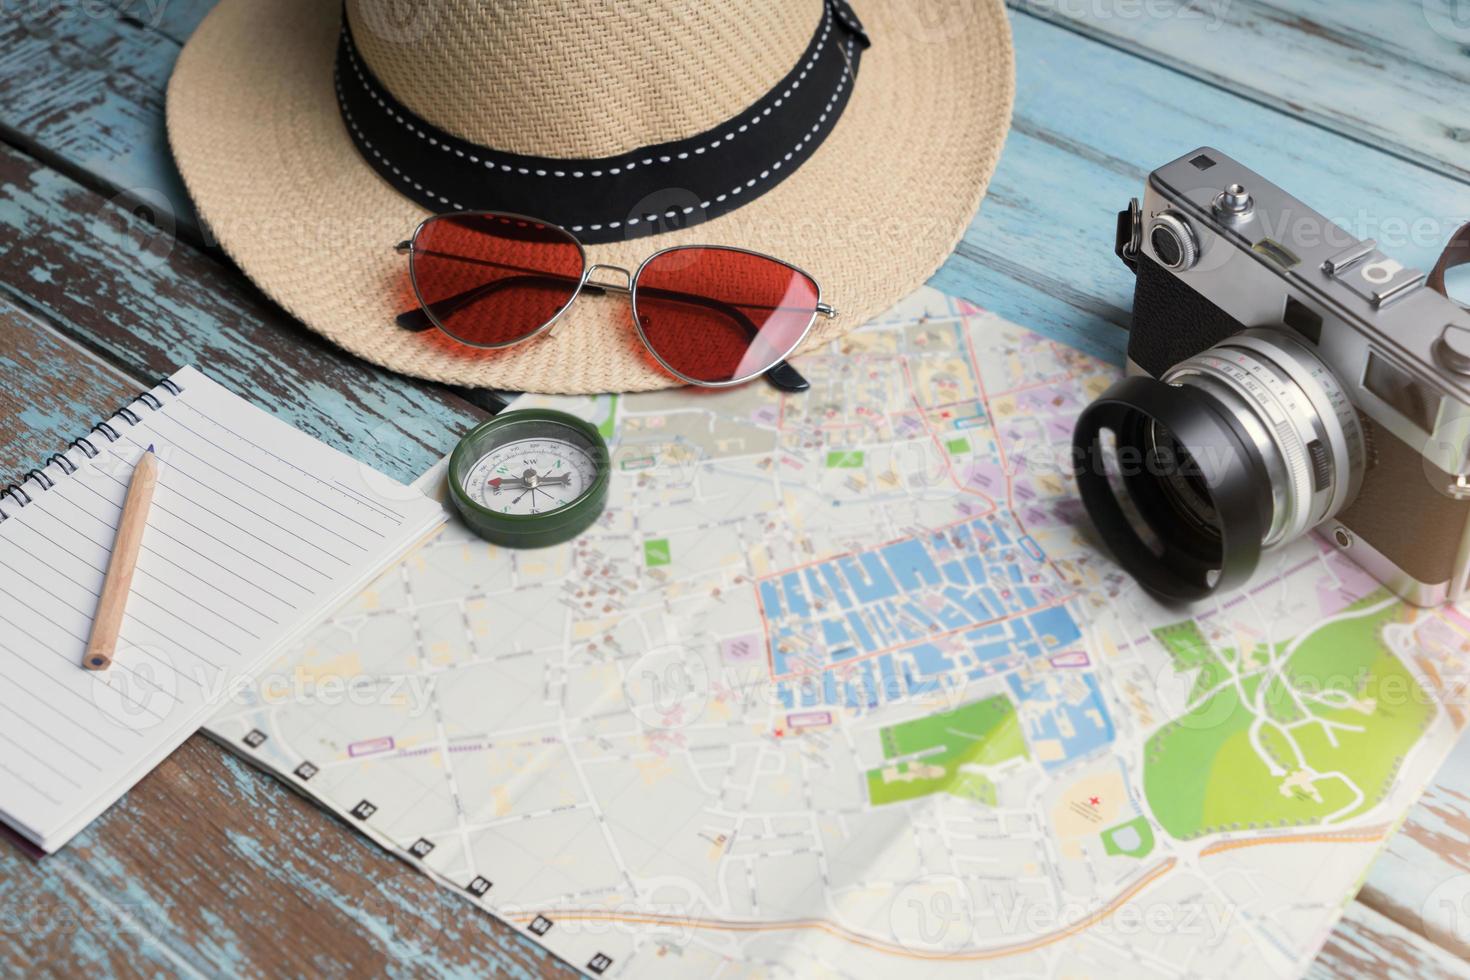 Compass with film camera and accessories for travel planning photo